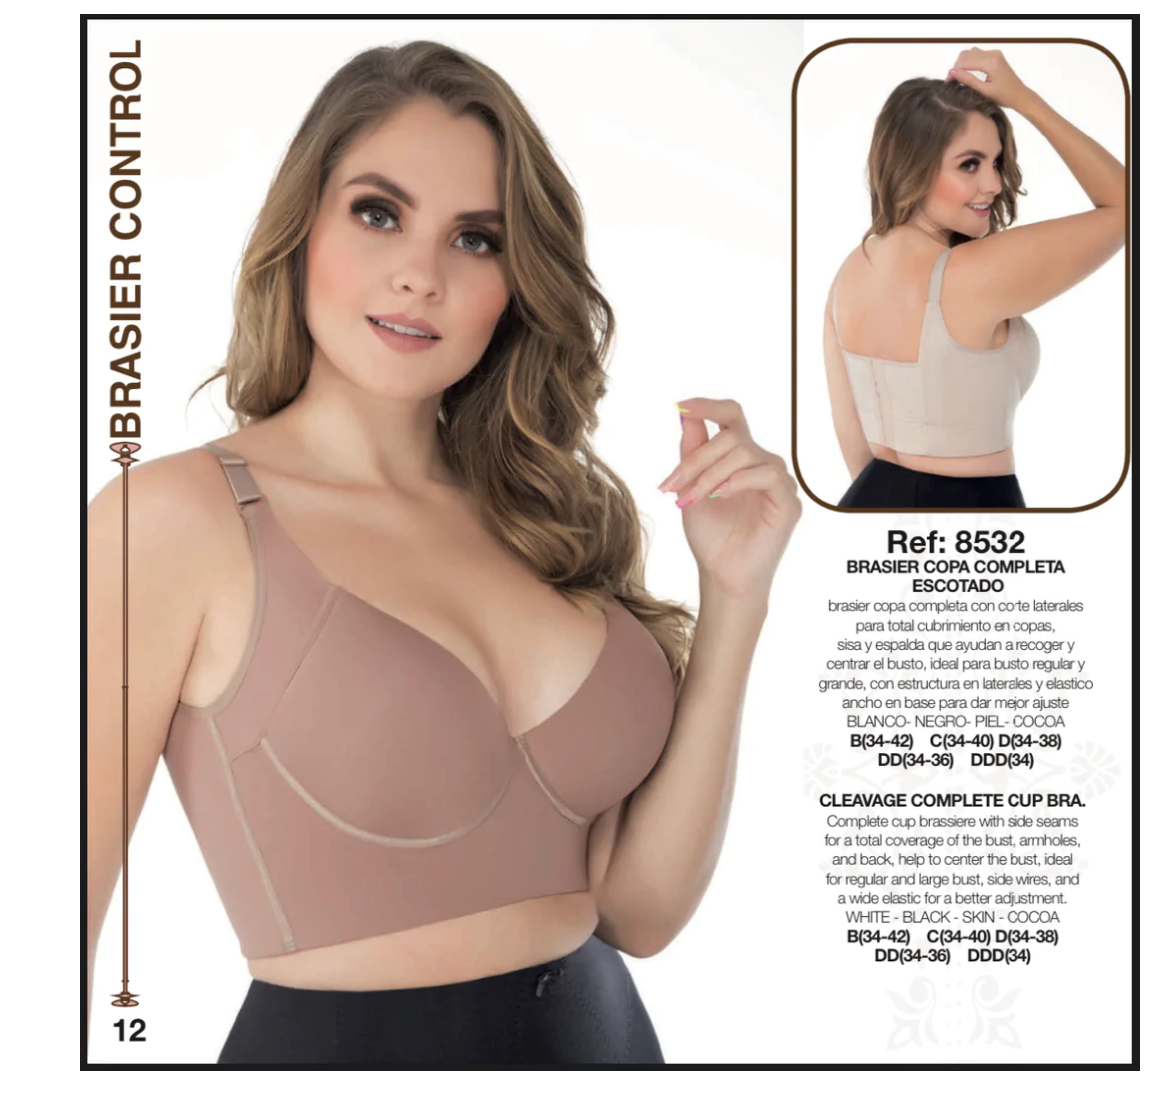 Back Size 38 Cup Size G Full Cup, Bras